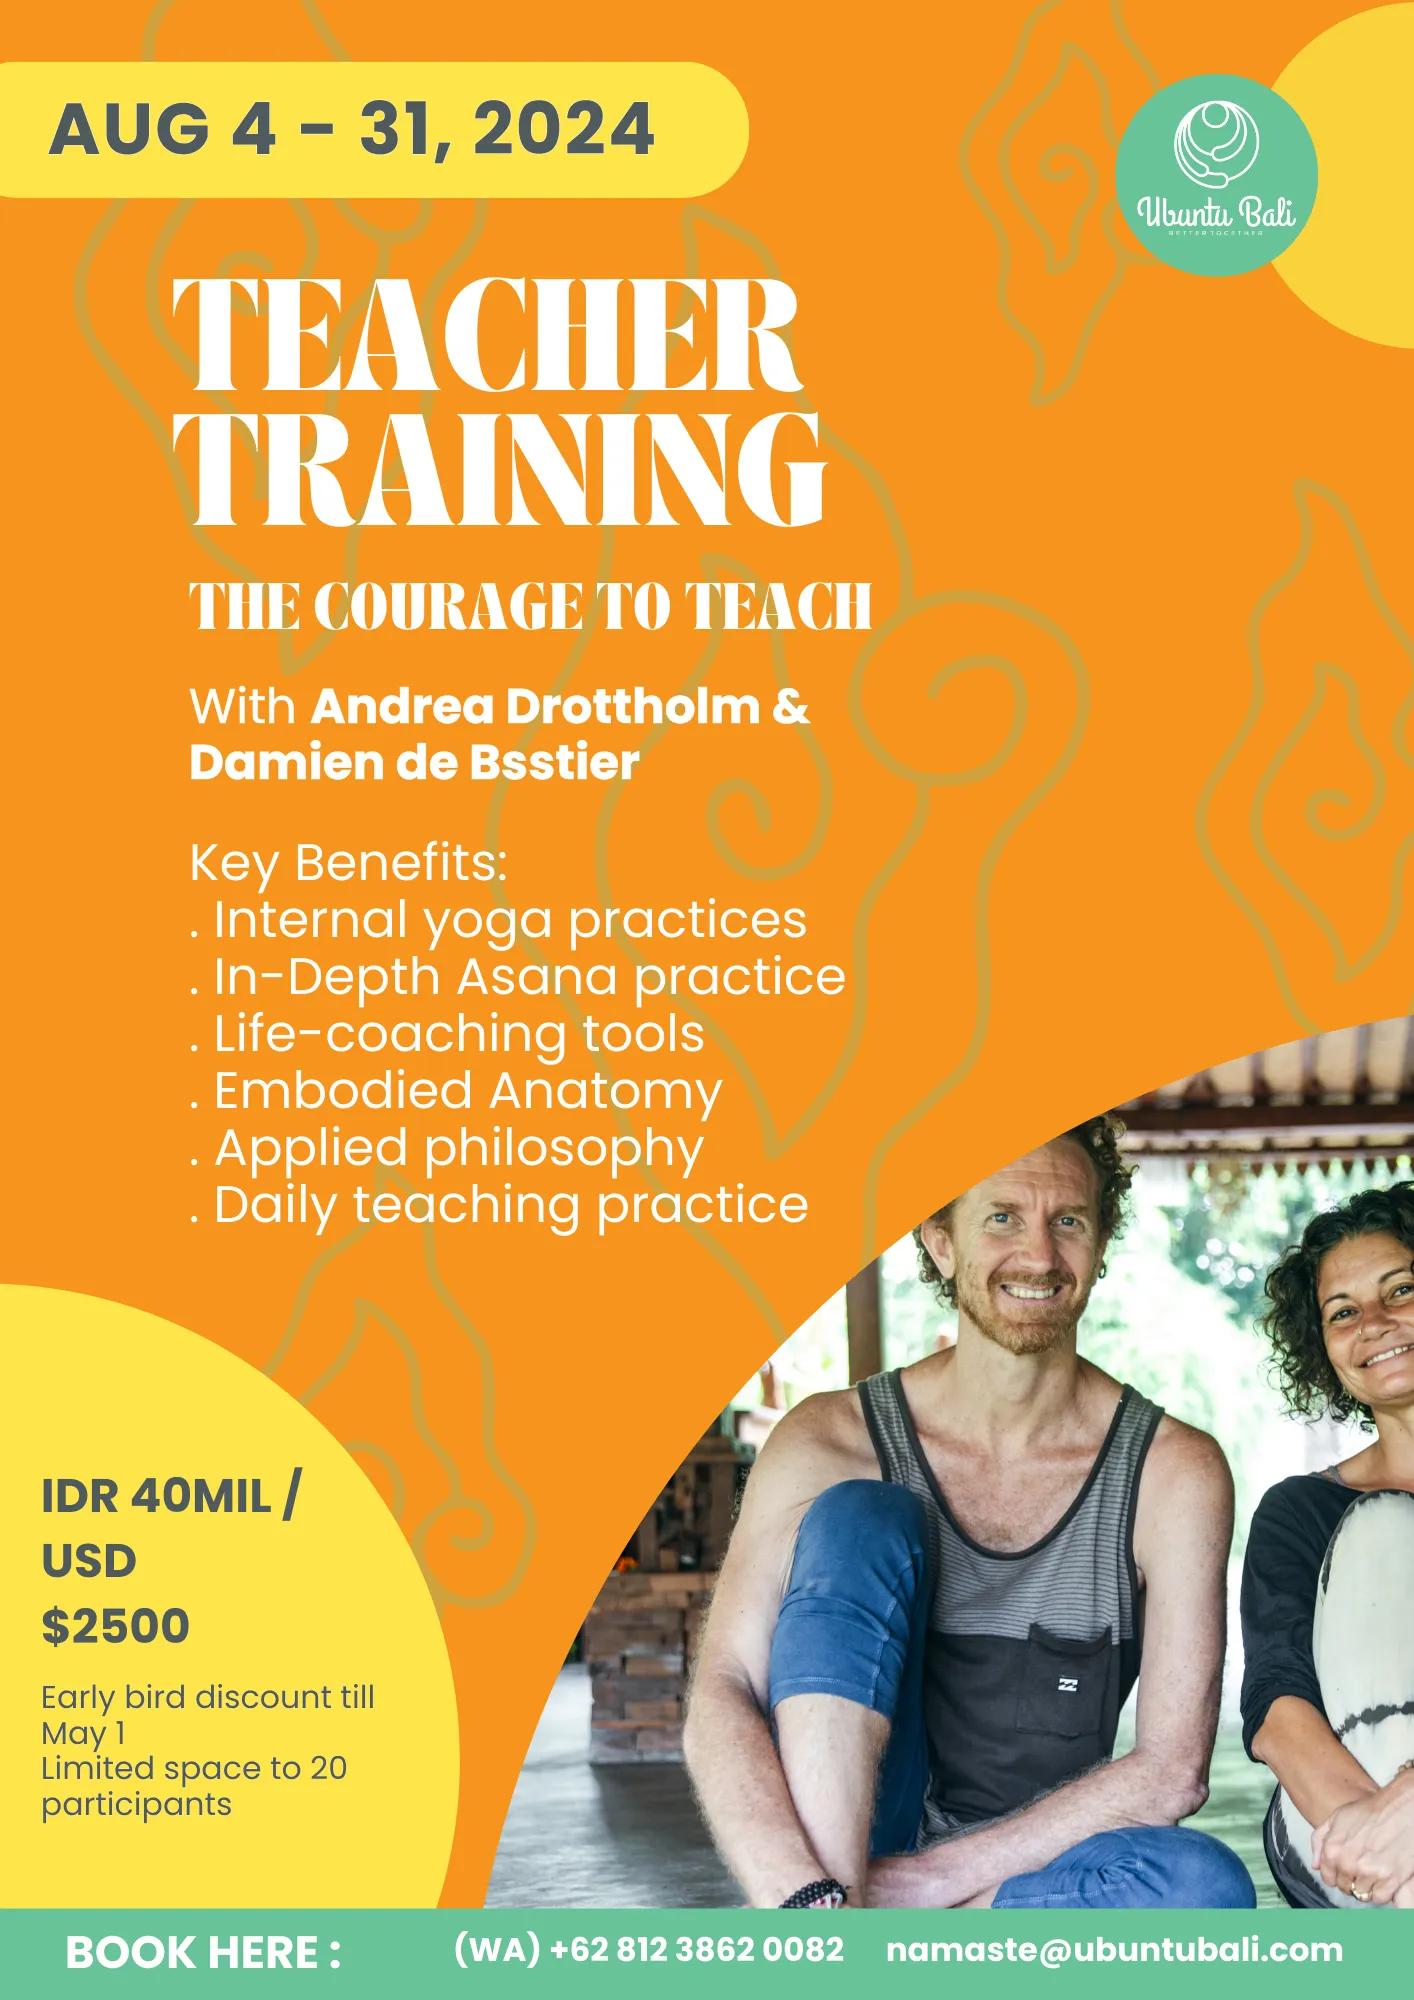 Event at Ubuntu everyday in 2024: Yoga Teacher Training: The Courage to Teach